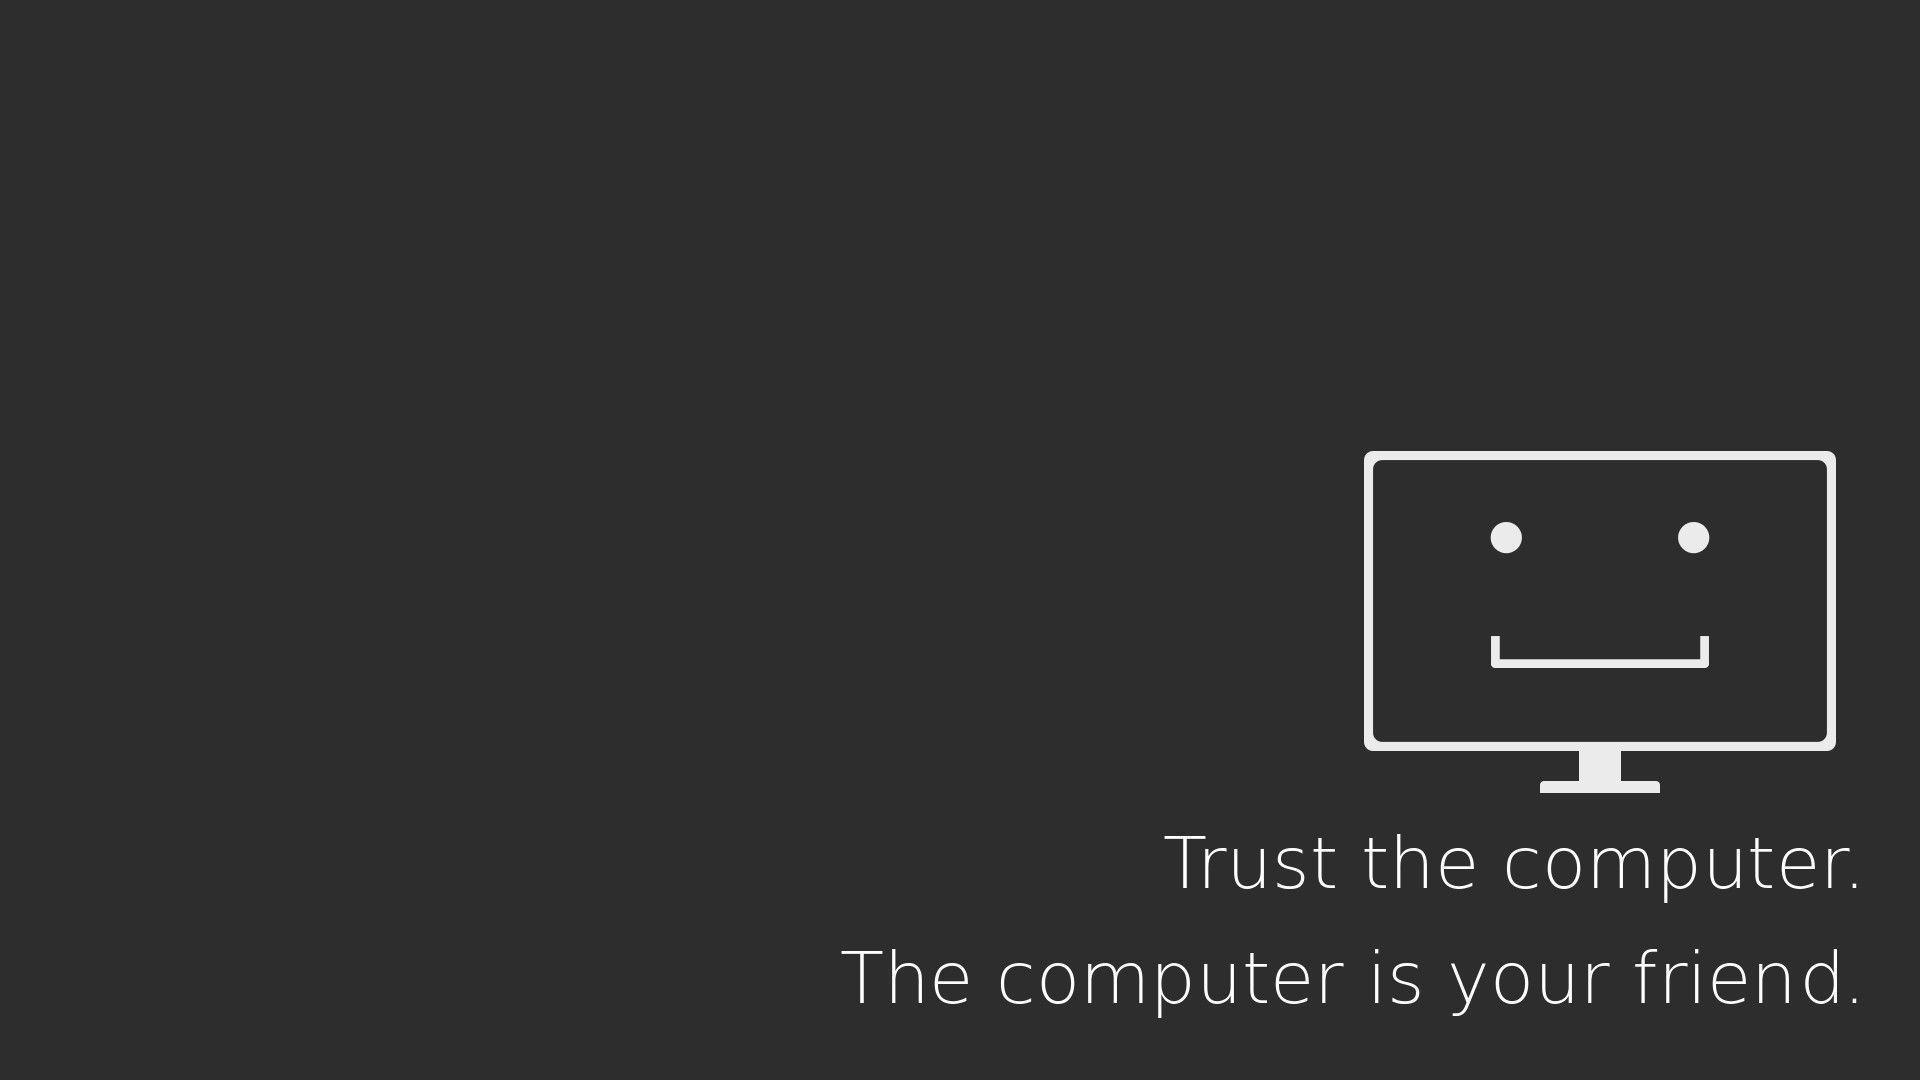 Trust the computer is your friend wallpaper and image